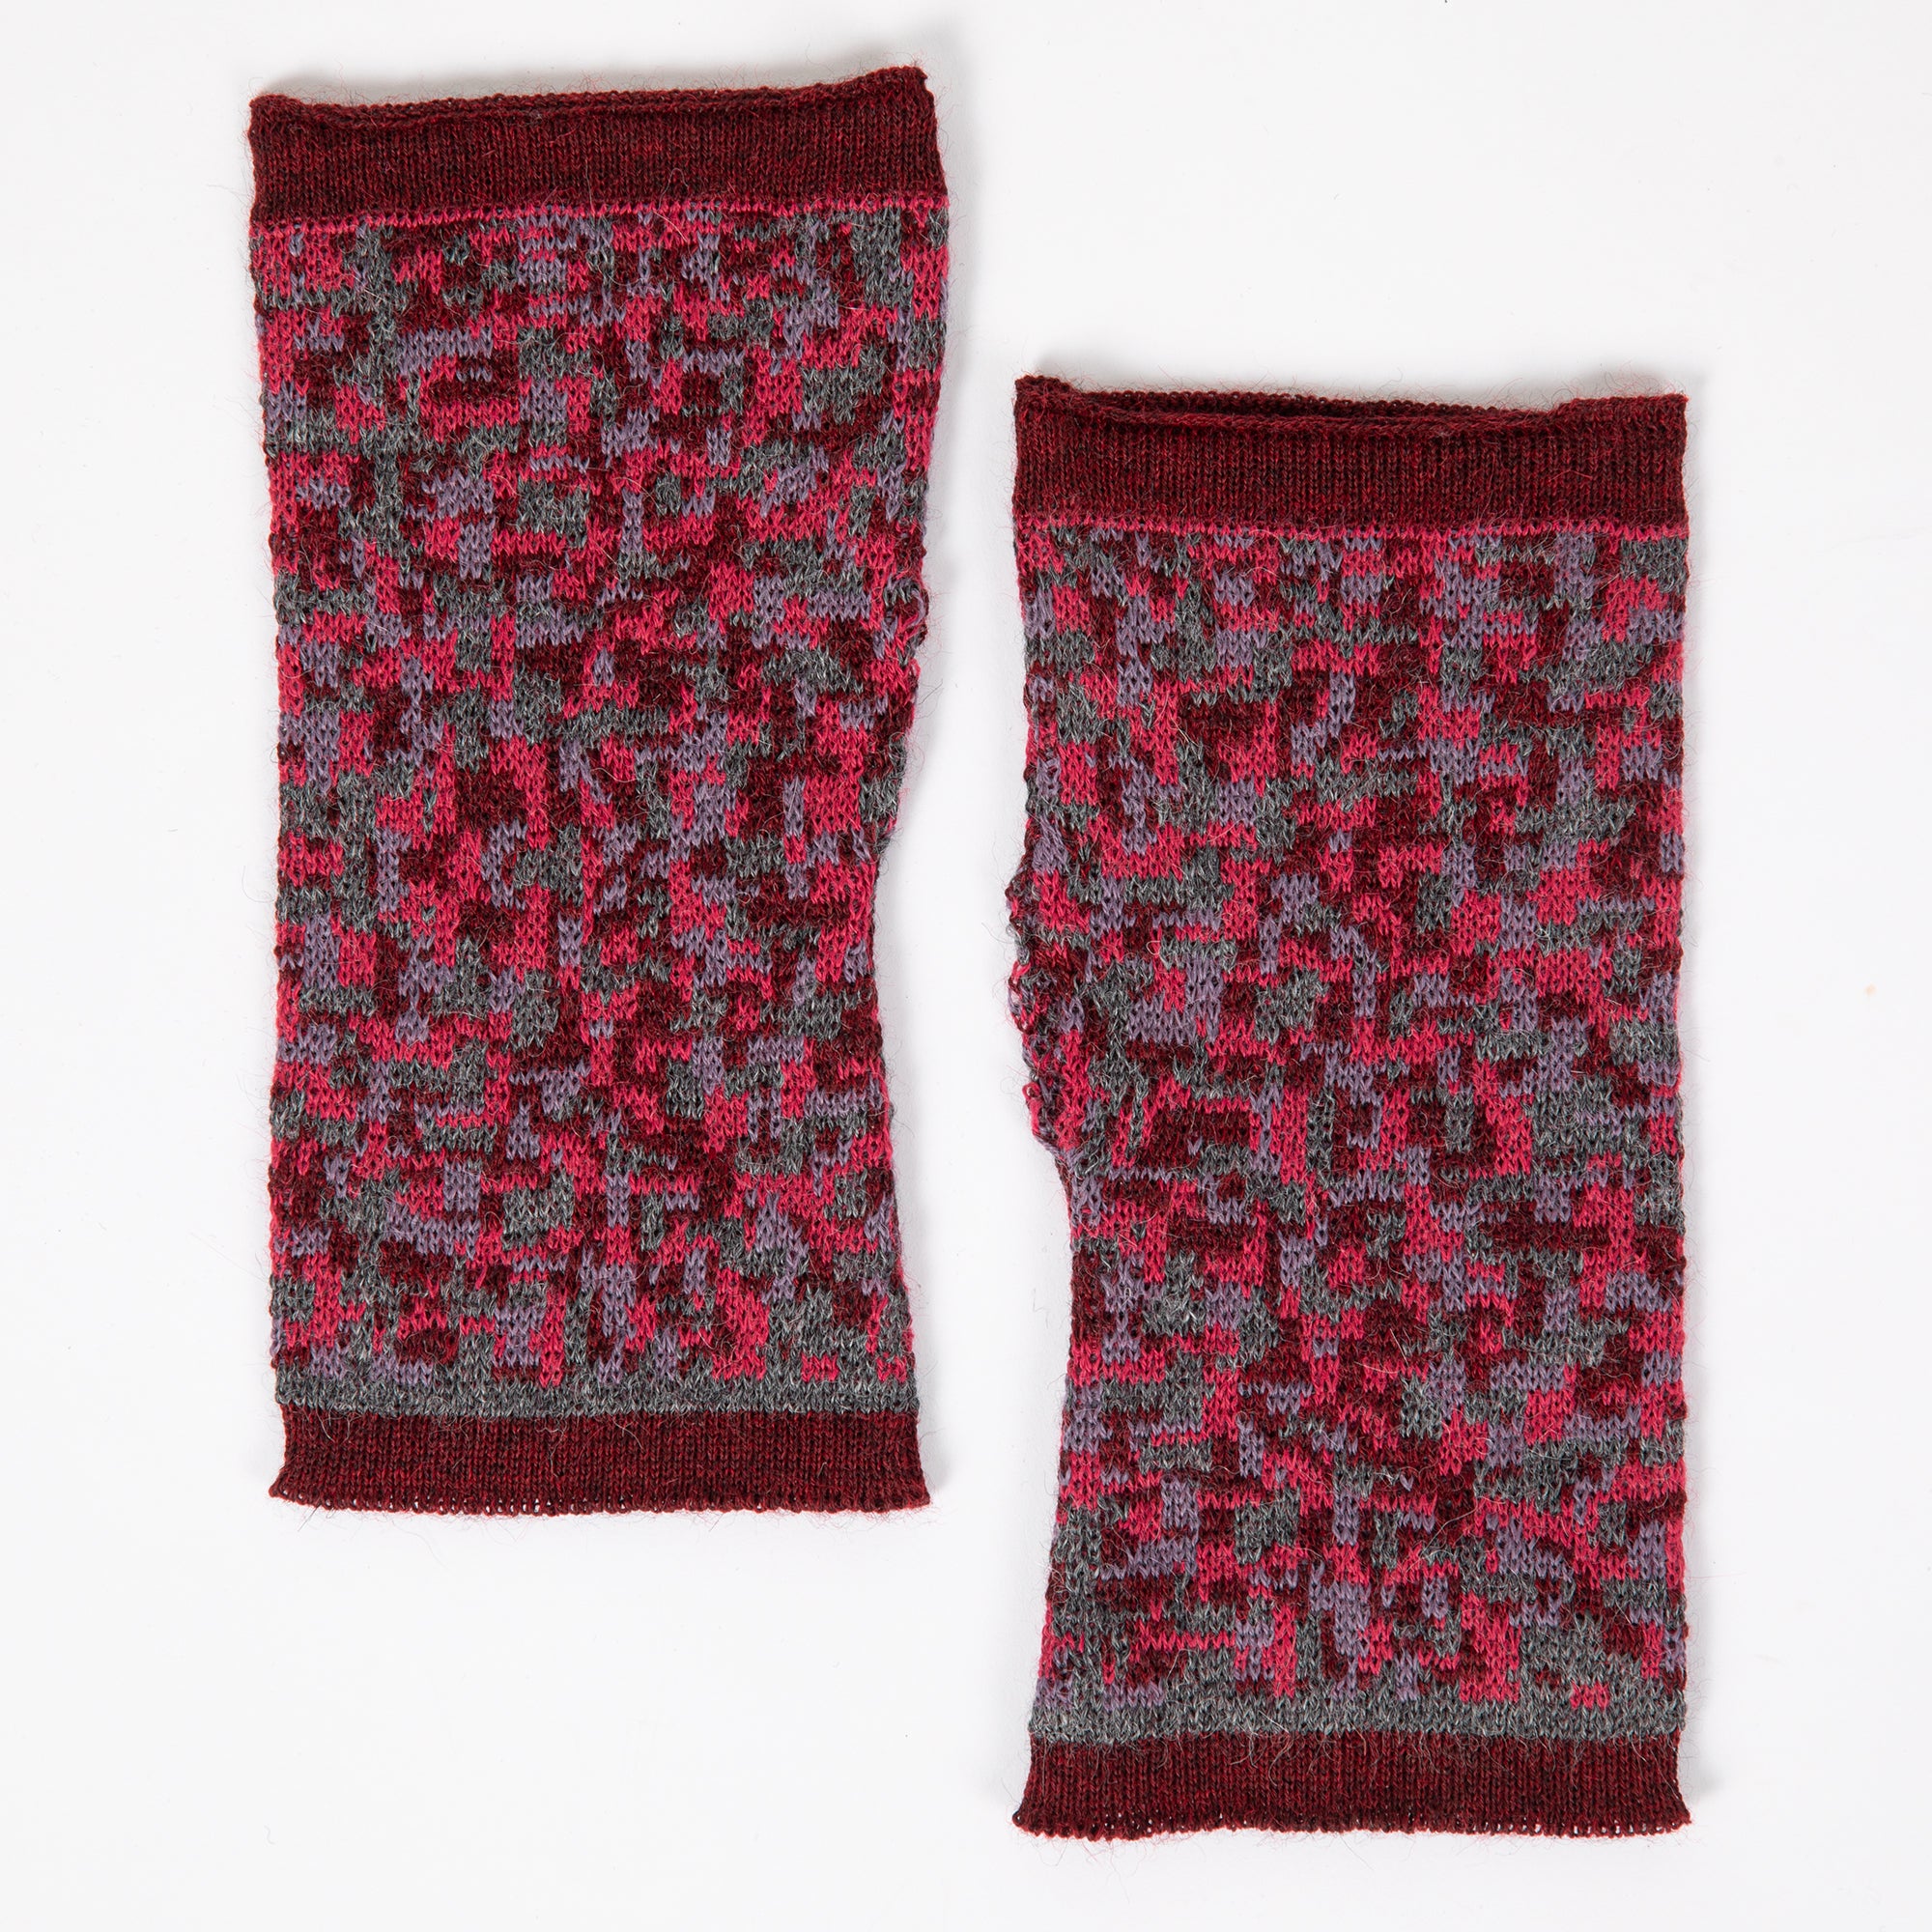 Small Squares Baby Alpaca Fingerless Mittens - Red